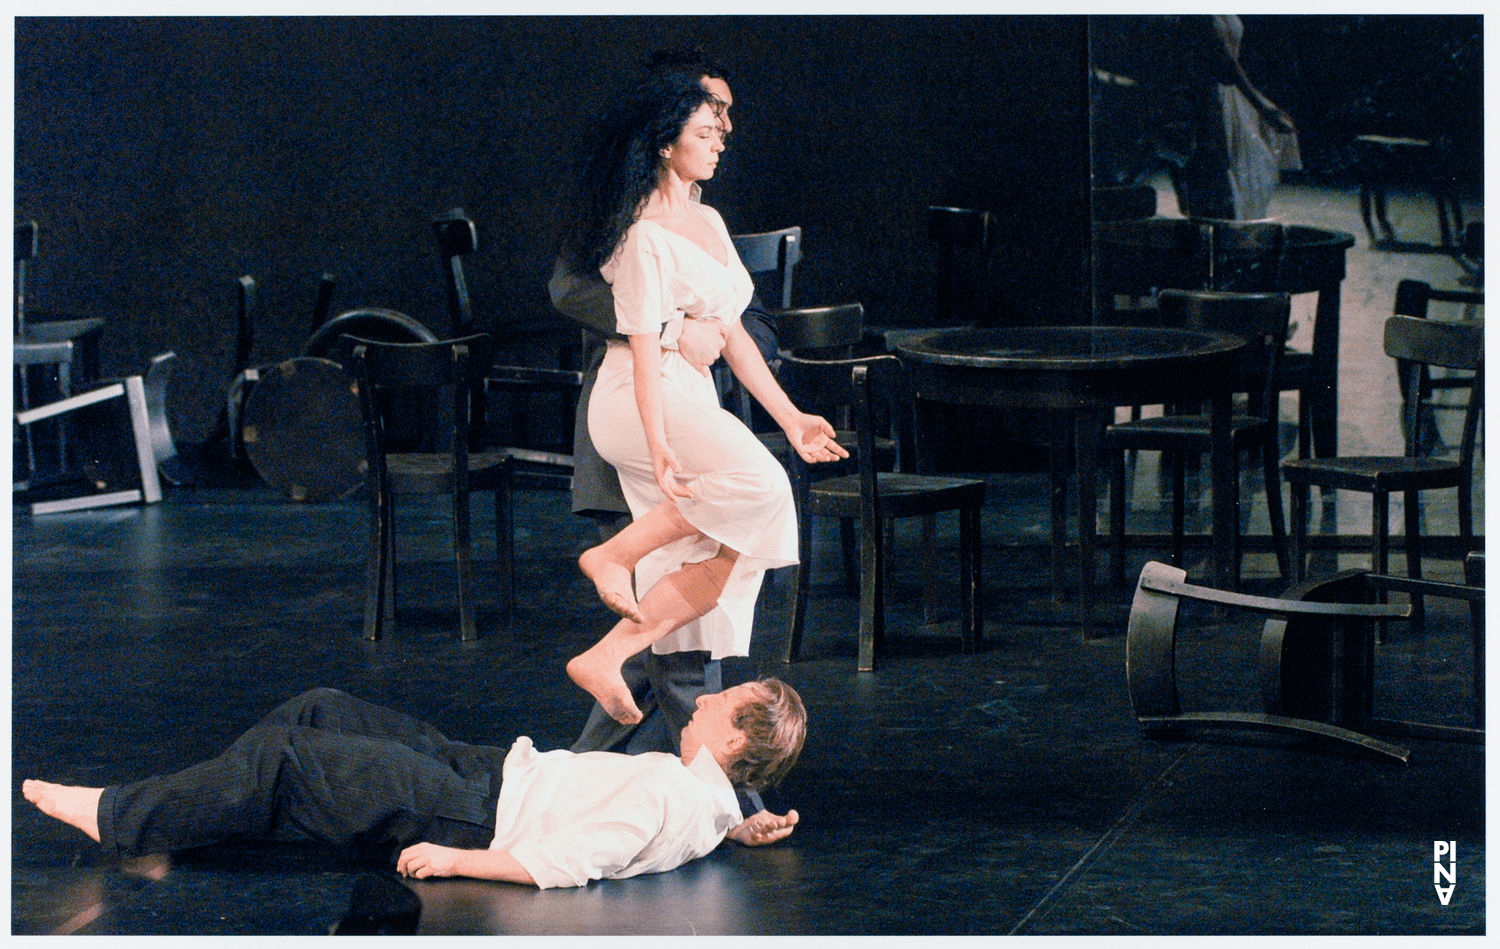 Dominique Mercy, Fabien Prioville and Aida Vainieri in “Café Müller” by Pina Bausch